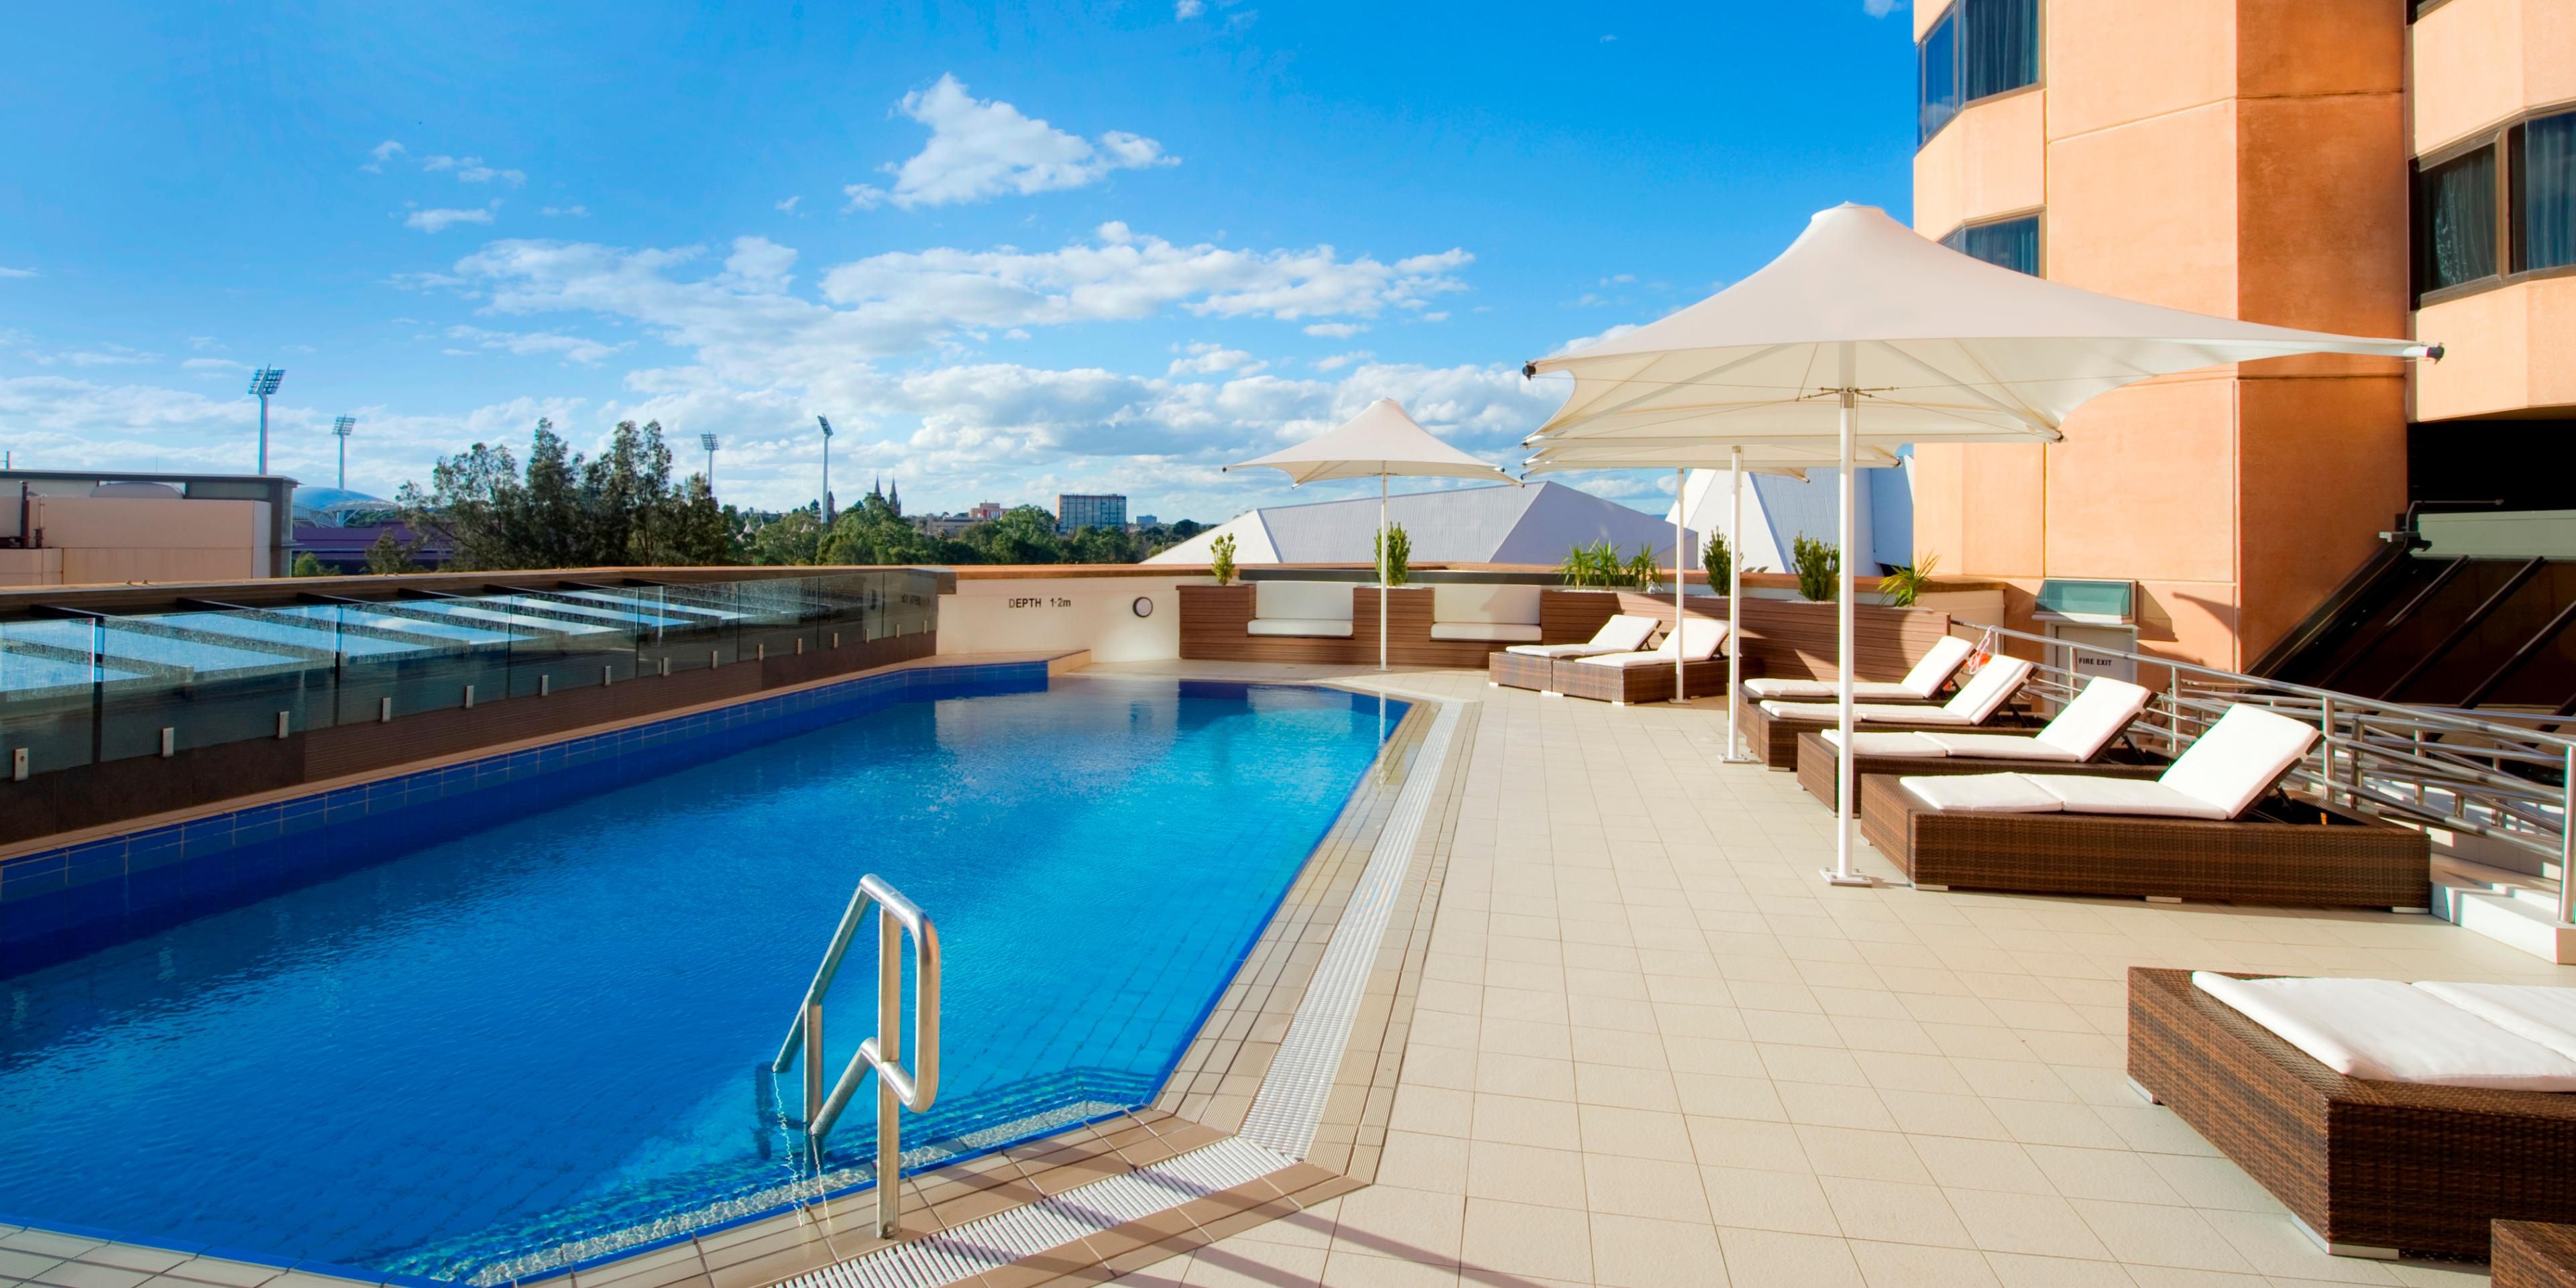 InterContinental Adelaide's heated pool is open from sunrise to sunset. Featuring magnificent views over the Riverbank Precinct and Adelaide Oval, our pool deck is the perfect place to unwind.